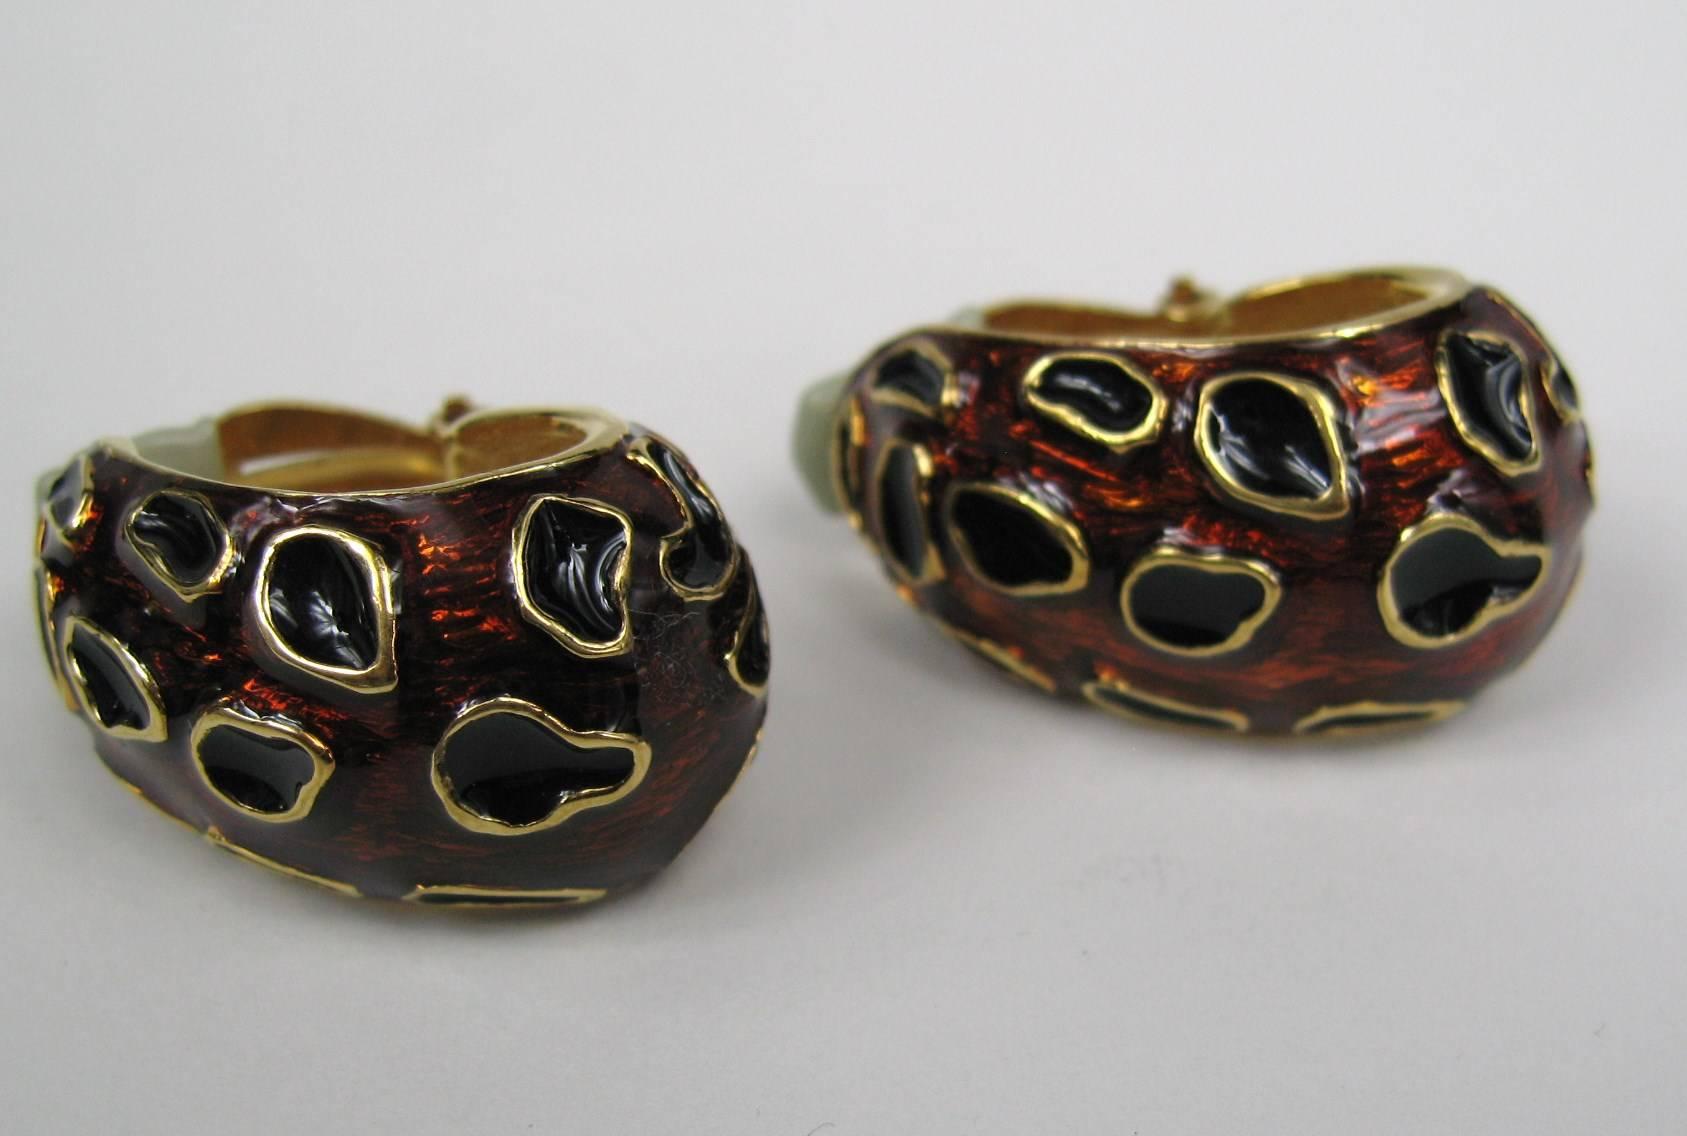 A Pair of enameled CINER earrings. These match the Giraffe Beaded Ciner necklace that is listed as well. They measure 1.48 top to bottom x .78  at the Widest Point. This is out of a massive collection of Contemporary designer clothing as well as